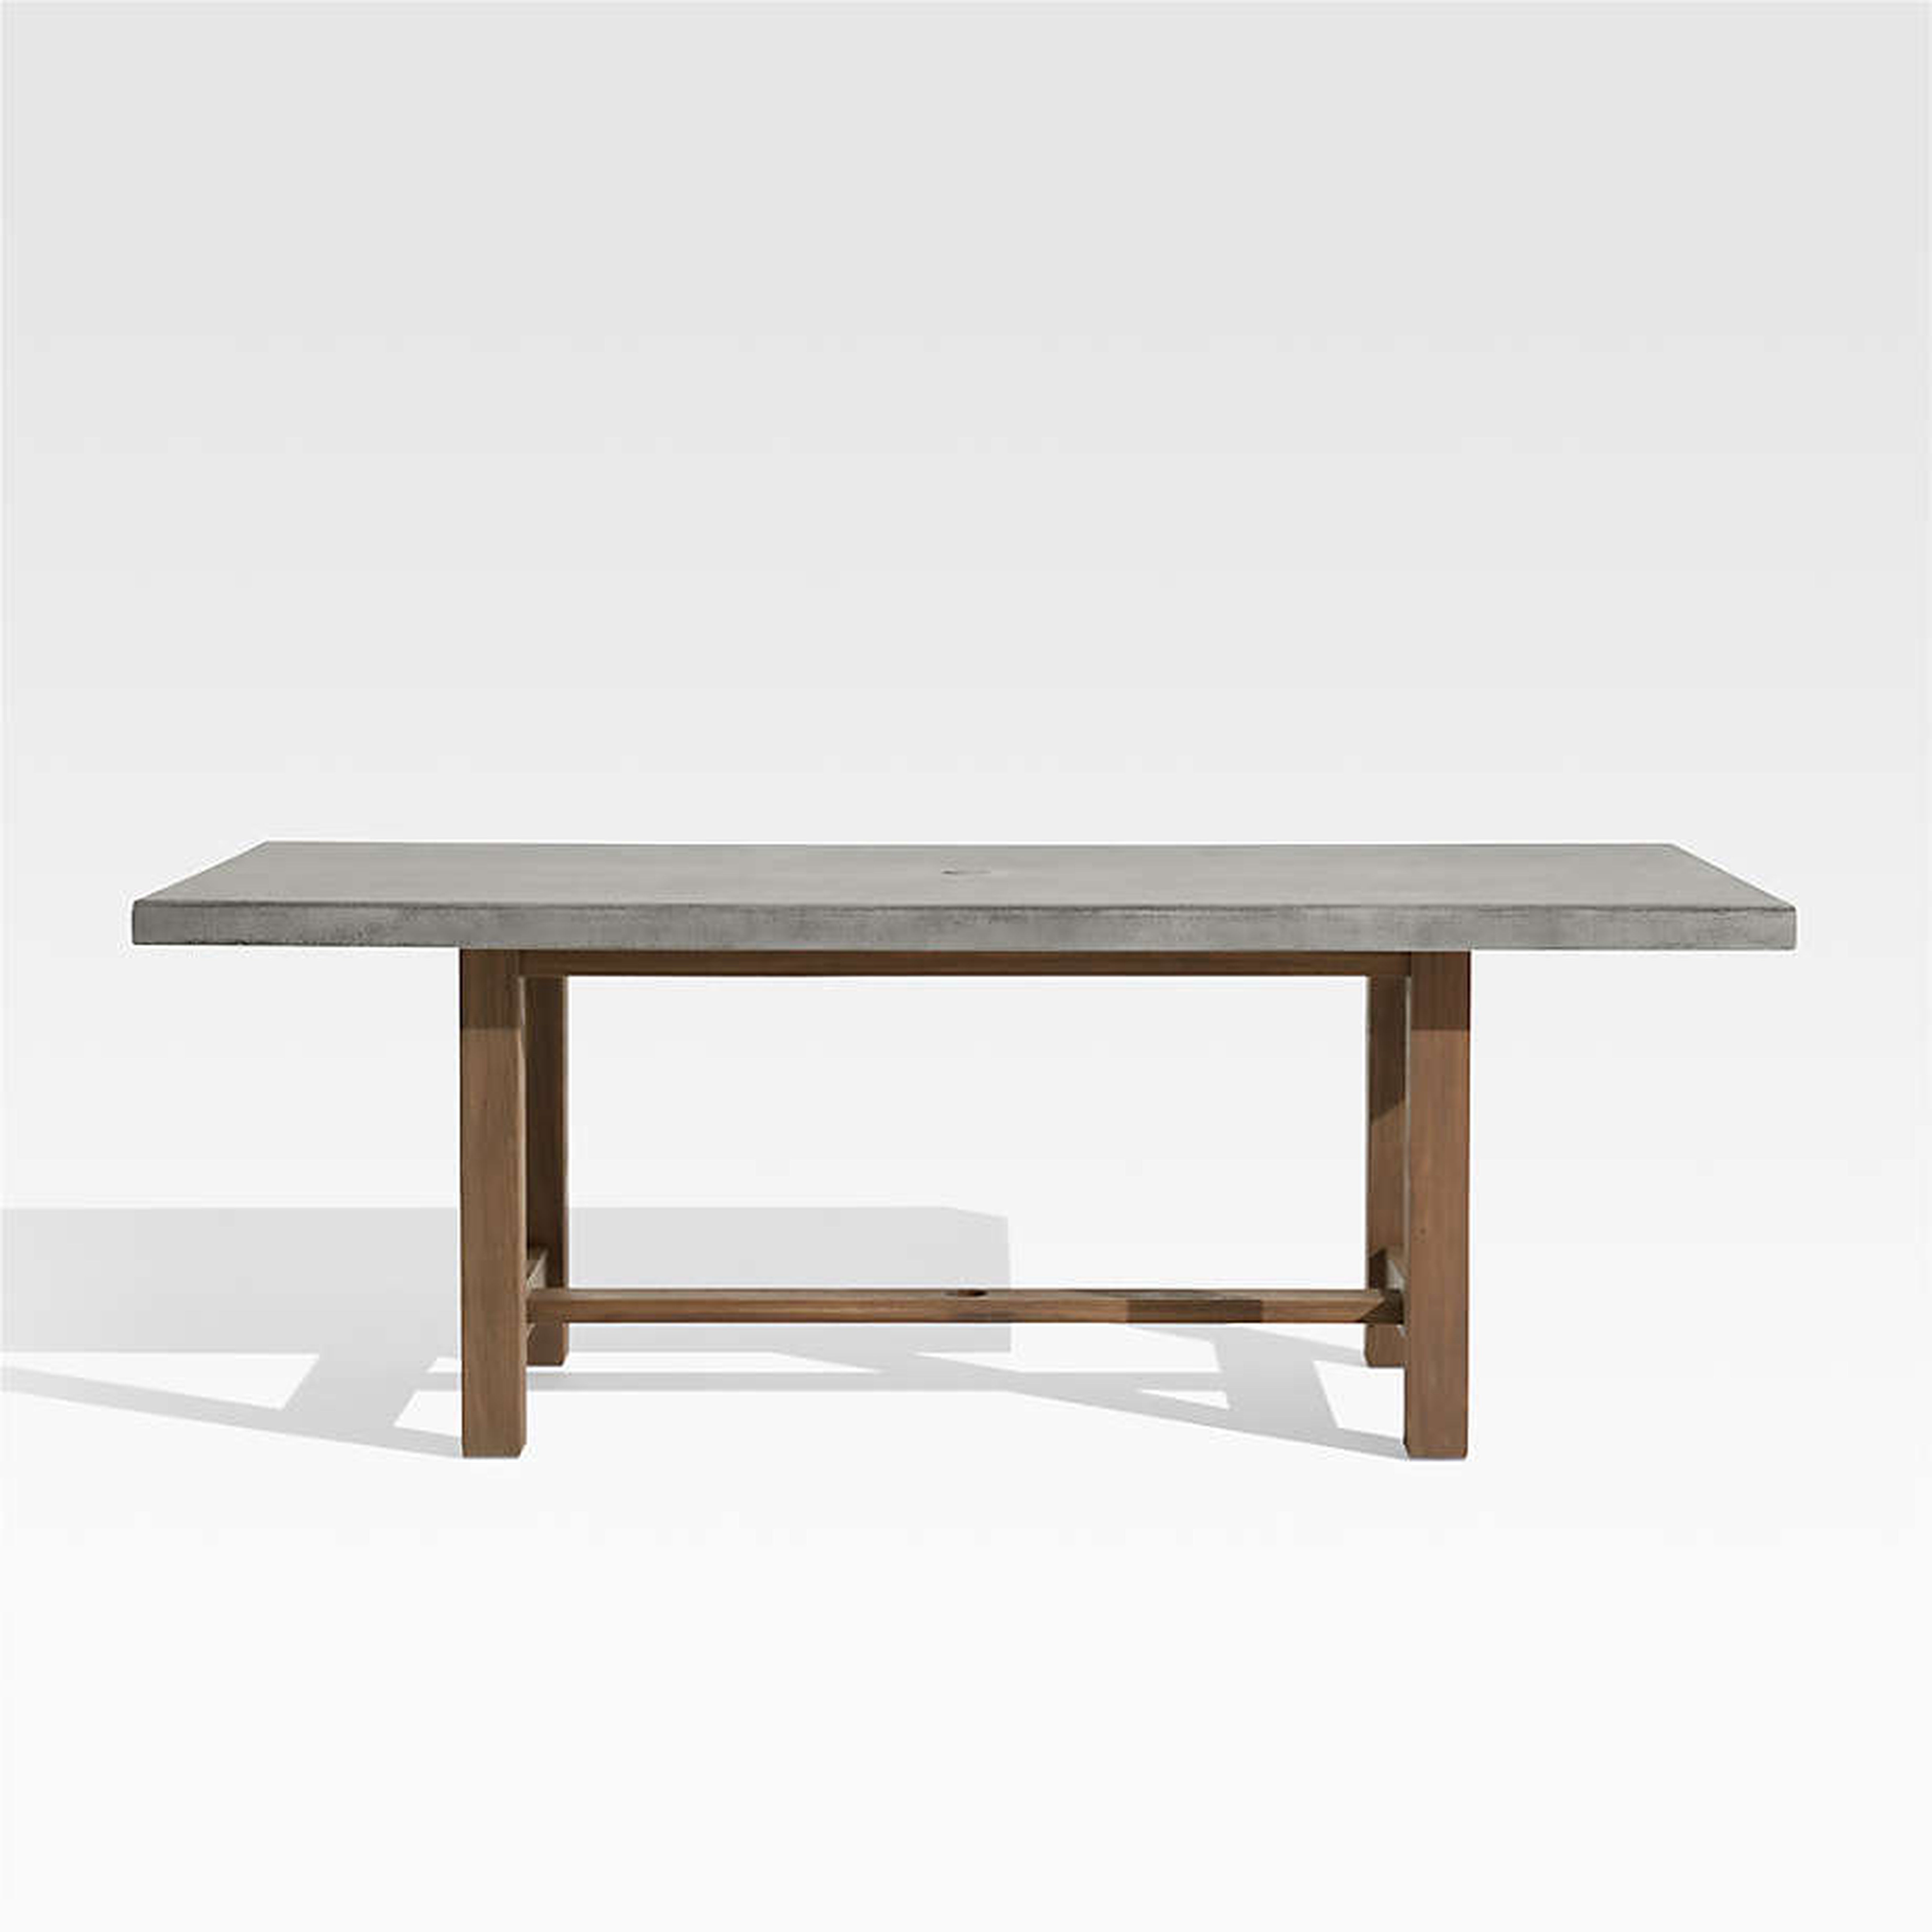 Abaco Dining Table - Crate and Barrel